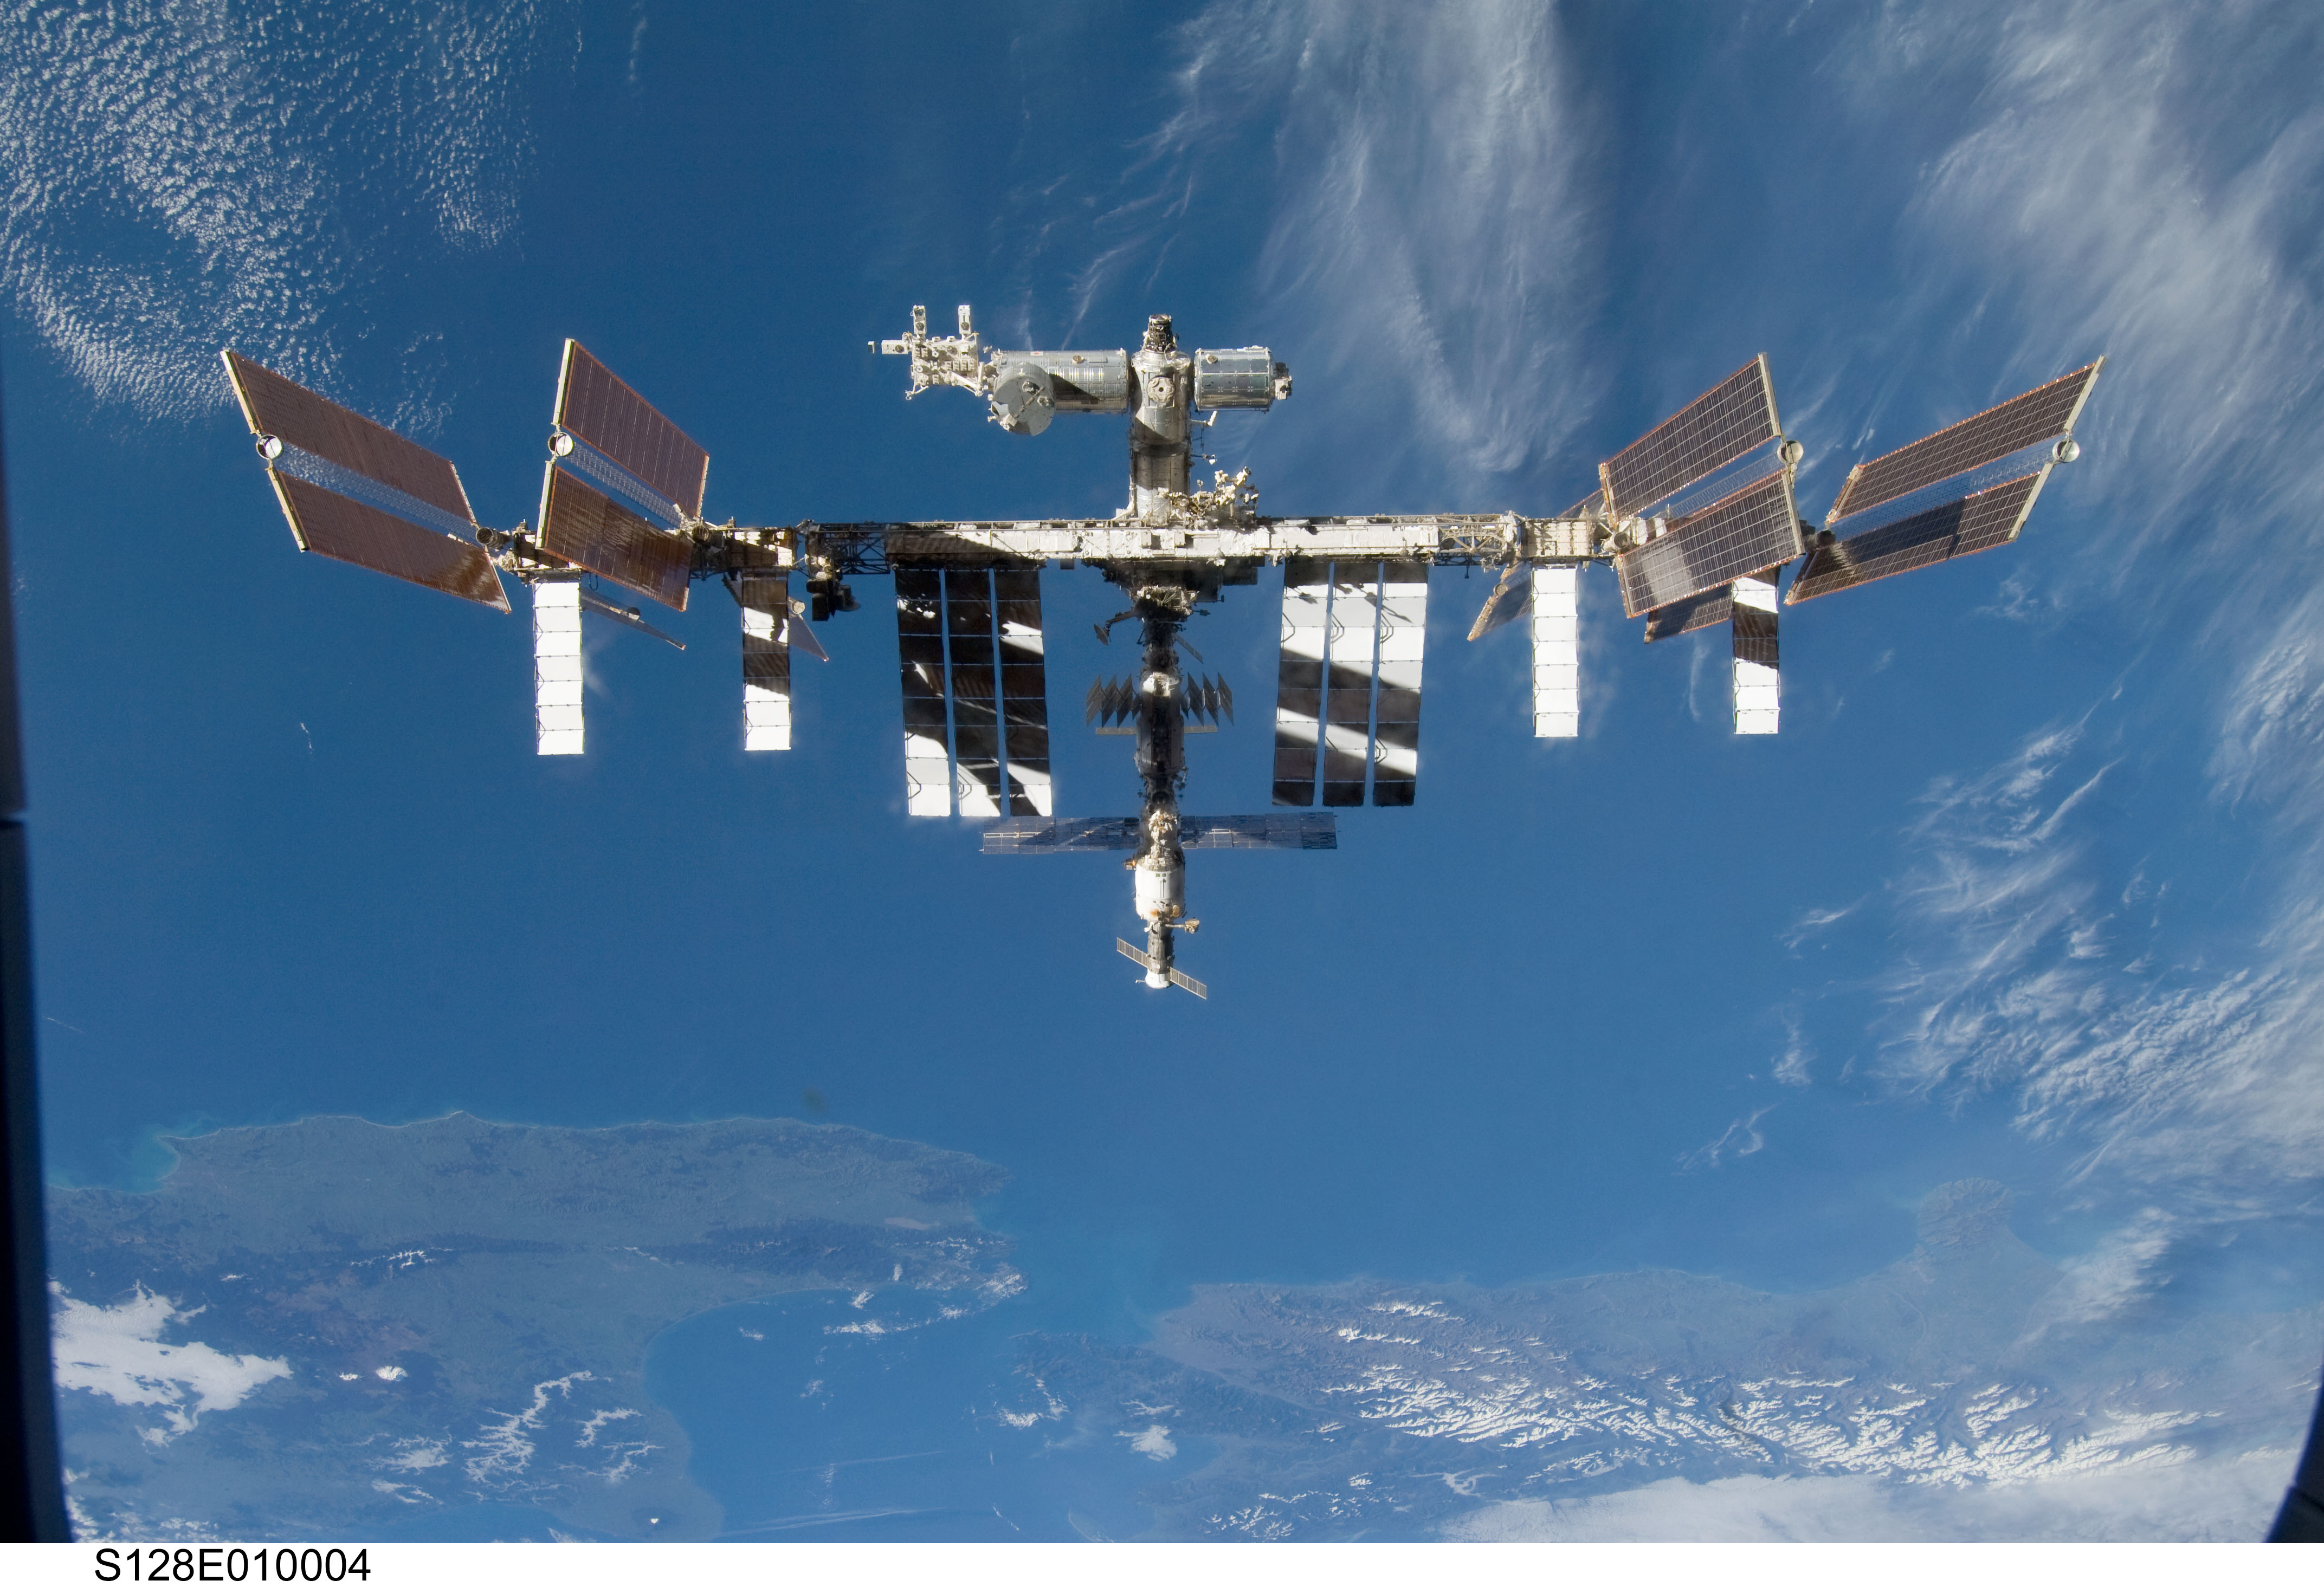 NASA photo ISS International Space Station STS 128 shuttle astronaut NASA image posted on AmericaSpace